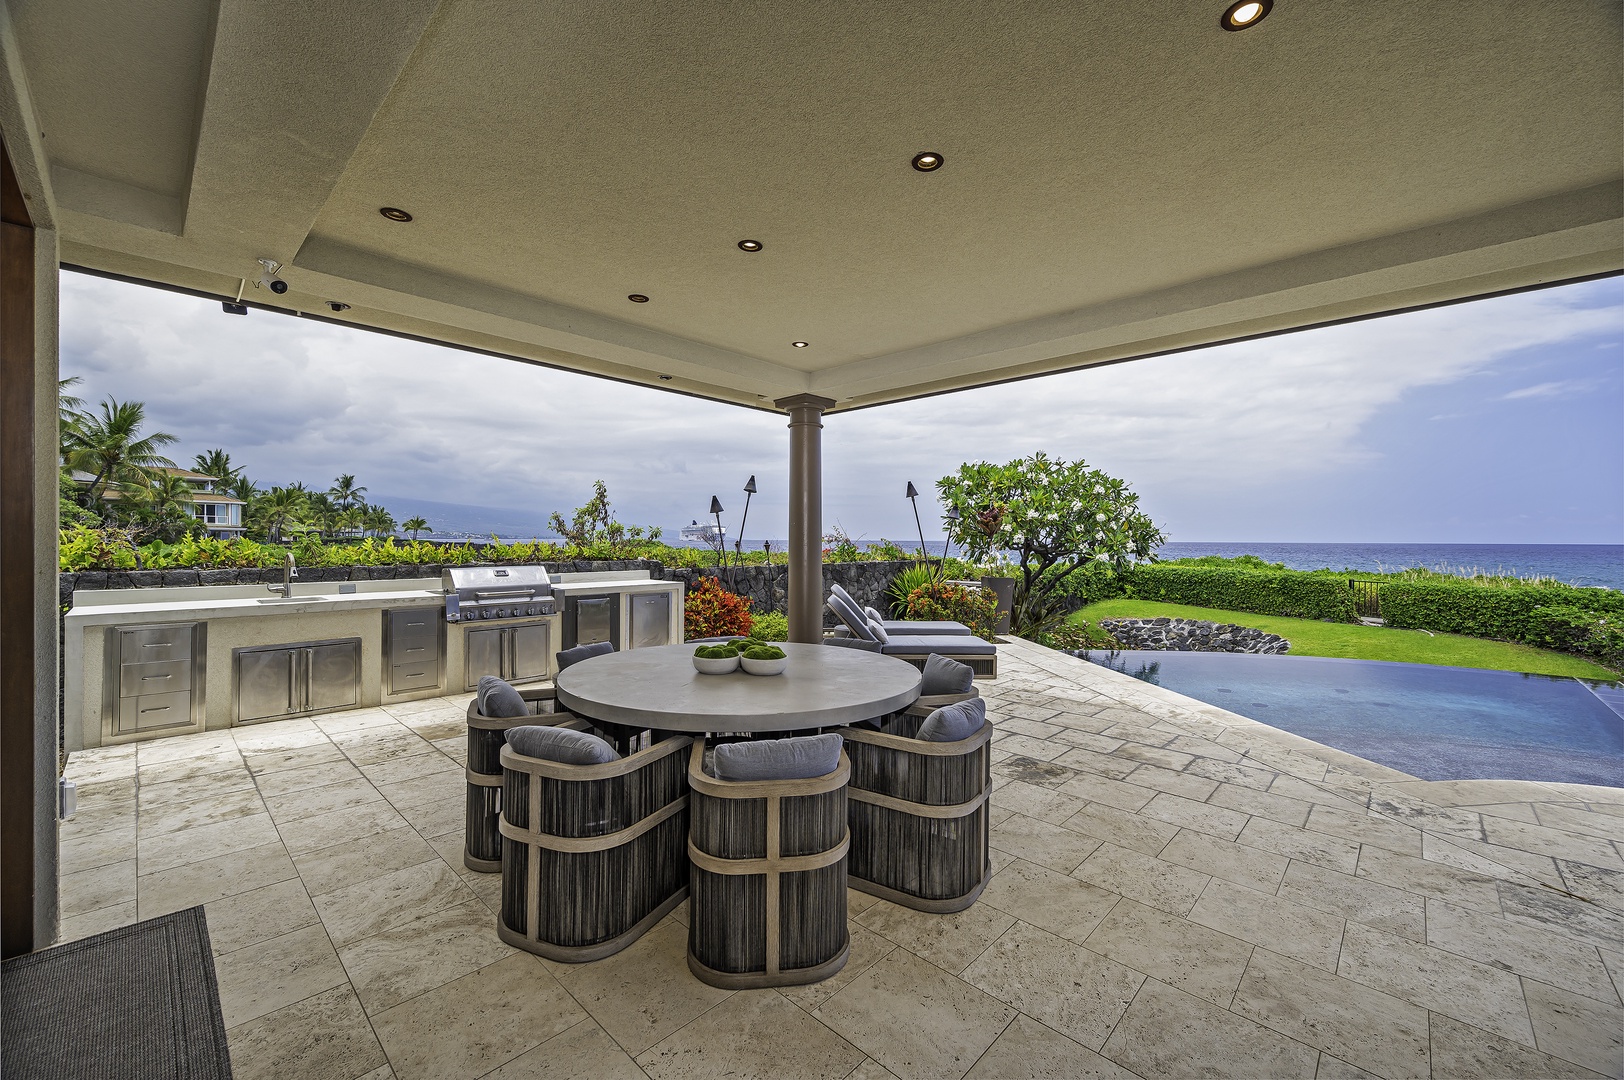 Kailua Kona Vacation Rentals, Alohi Kai Estate** - Outdoor area seamlessly connects to built in BBQ area with ice maker and new concrete BBQ top